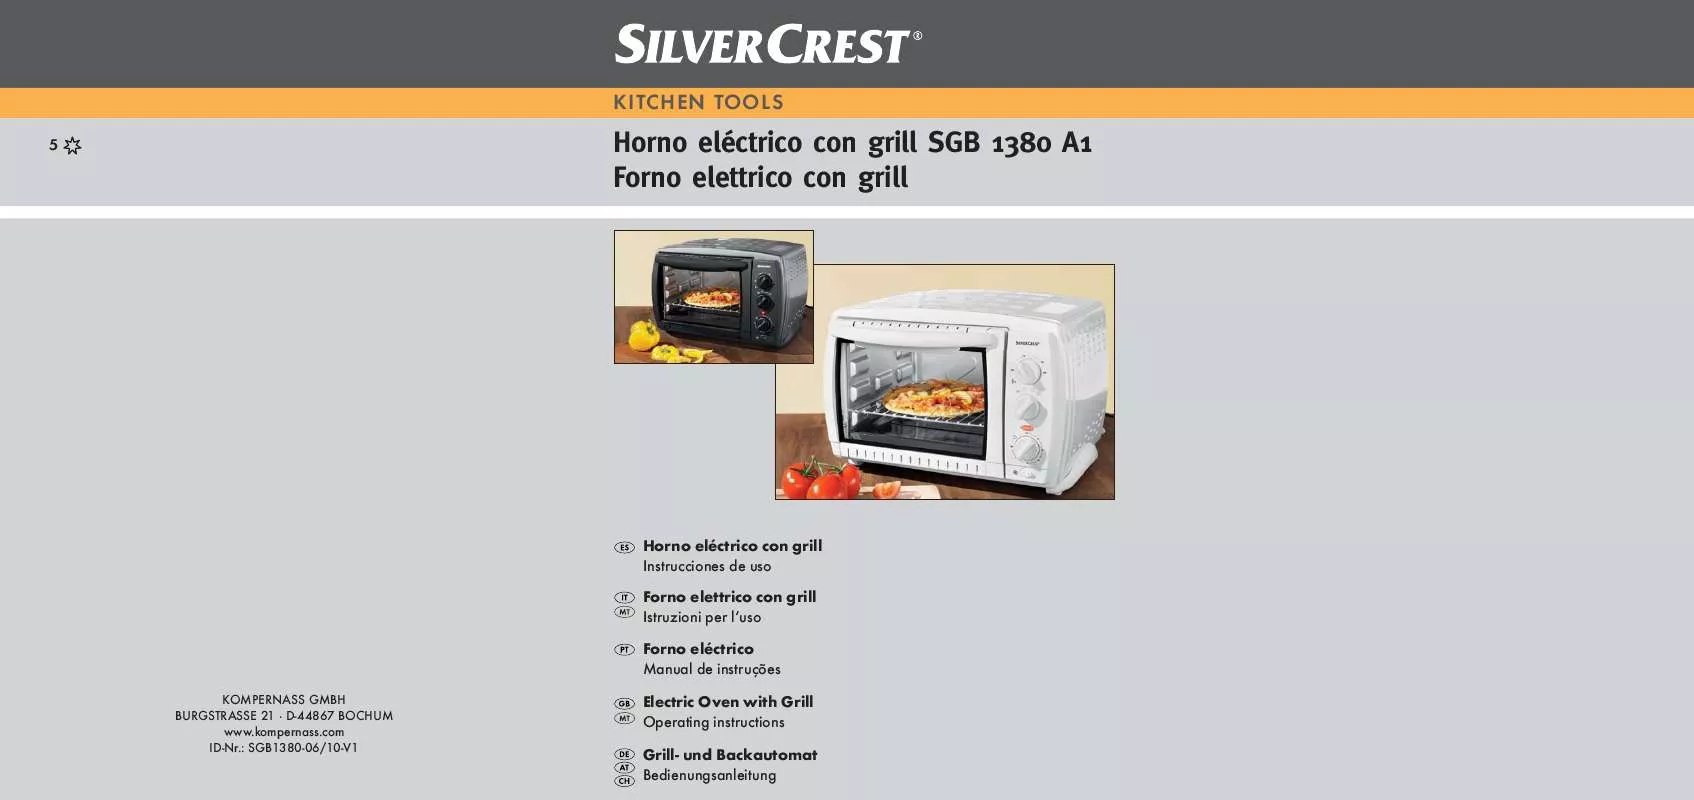 Mode d'emploi SILVERCREST SGB 1380 A1 ELECTRIC OVEN WITH GRILL